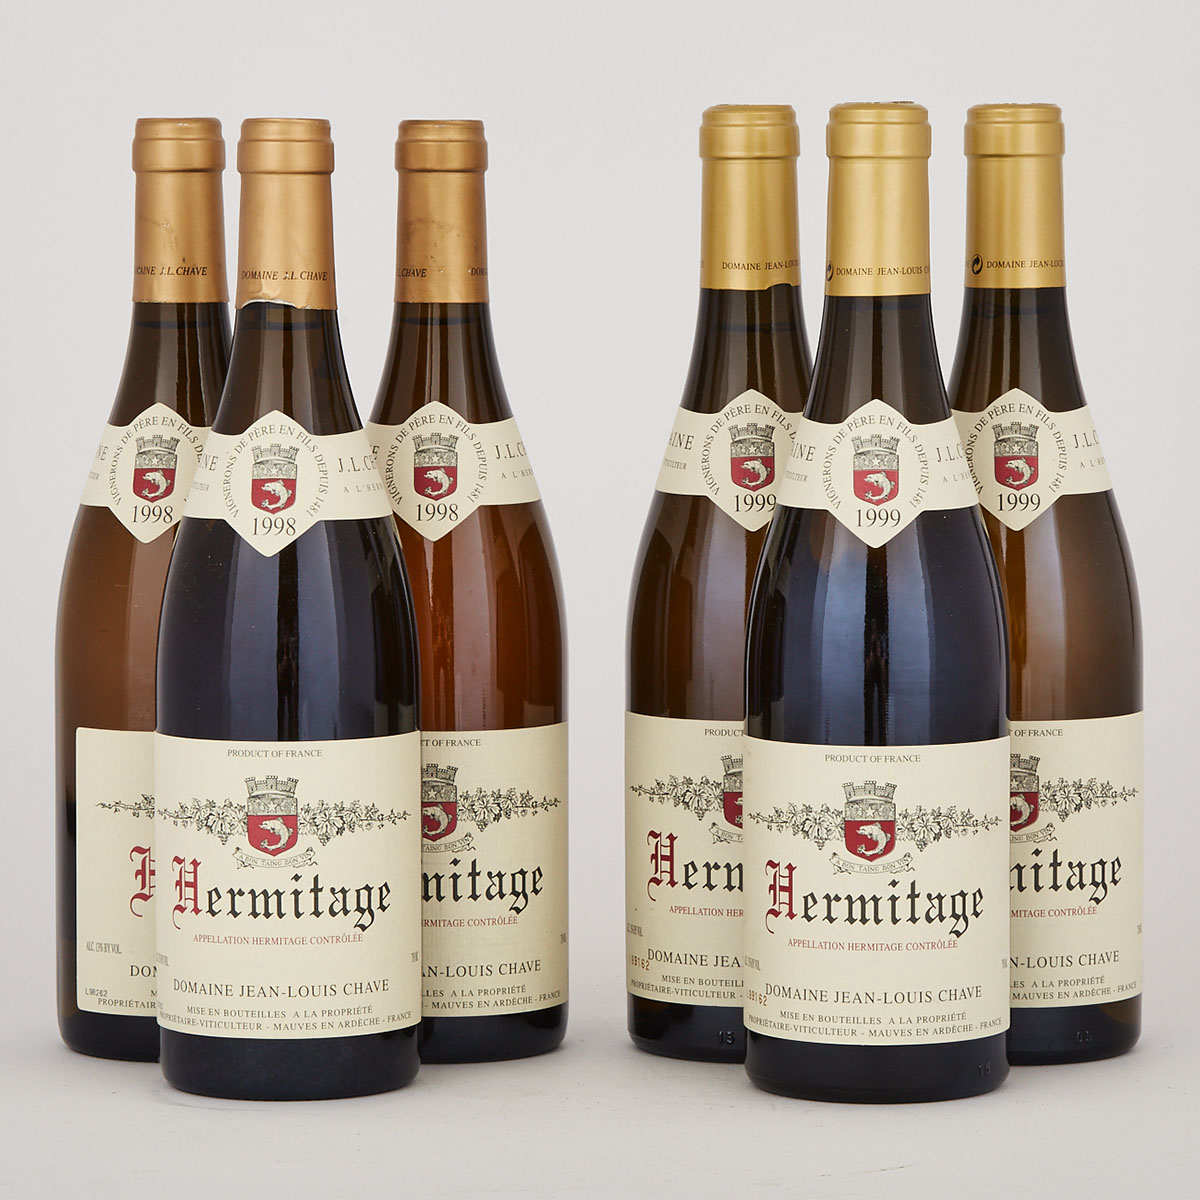 DOMAINE JEAN-LOUIS CHAVE HERMITAGE BLANC 1998 (3)
DOMAINE JEAN-LOUIS CHAVE HERMITAGE BLANC 1999 (3) 94 WA